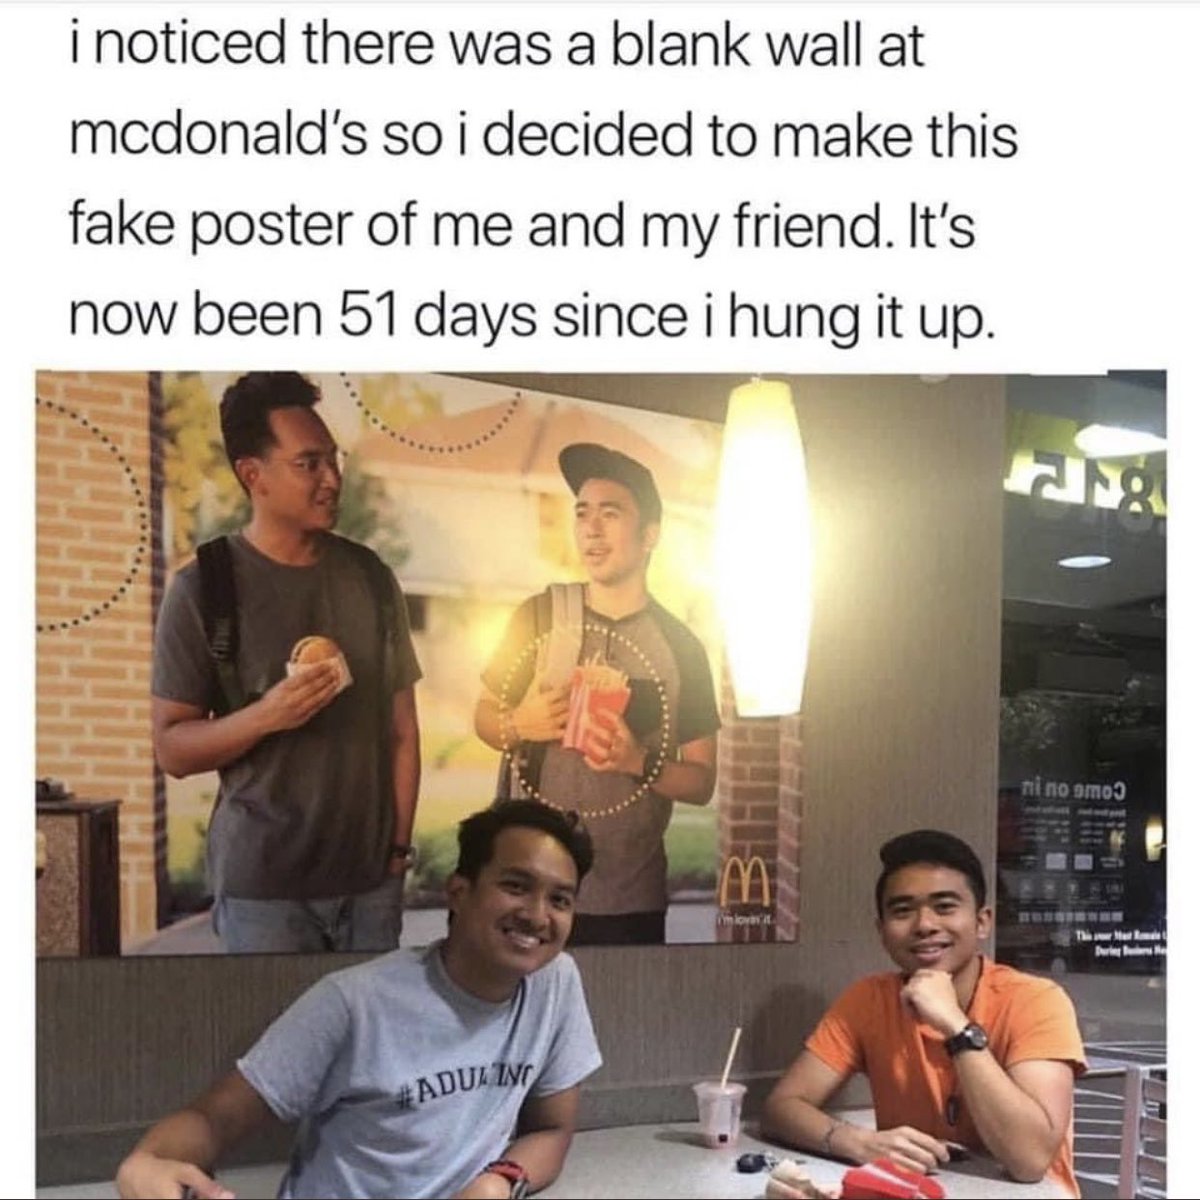 dudes posting their w's - fake mcdonald poster - i noticed there was a blank wall at mcdonald's so i decided to make this fake poster of me and my friend. It's now been 51 days since i hung it up. Adulin I'm lovas' it ni no amo This Mat Rome t During